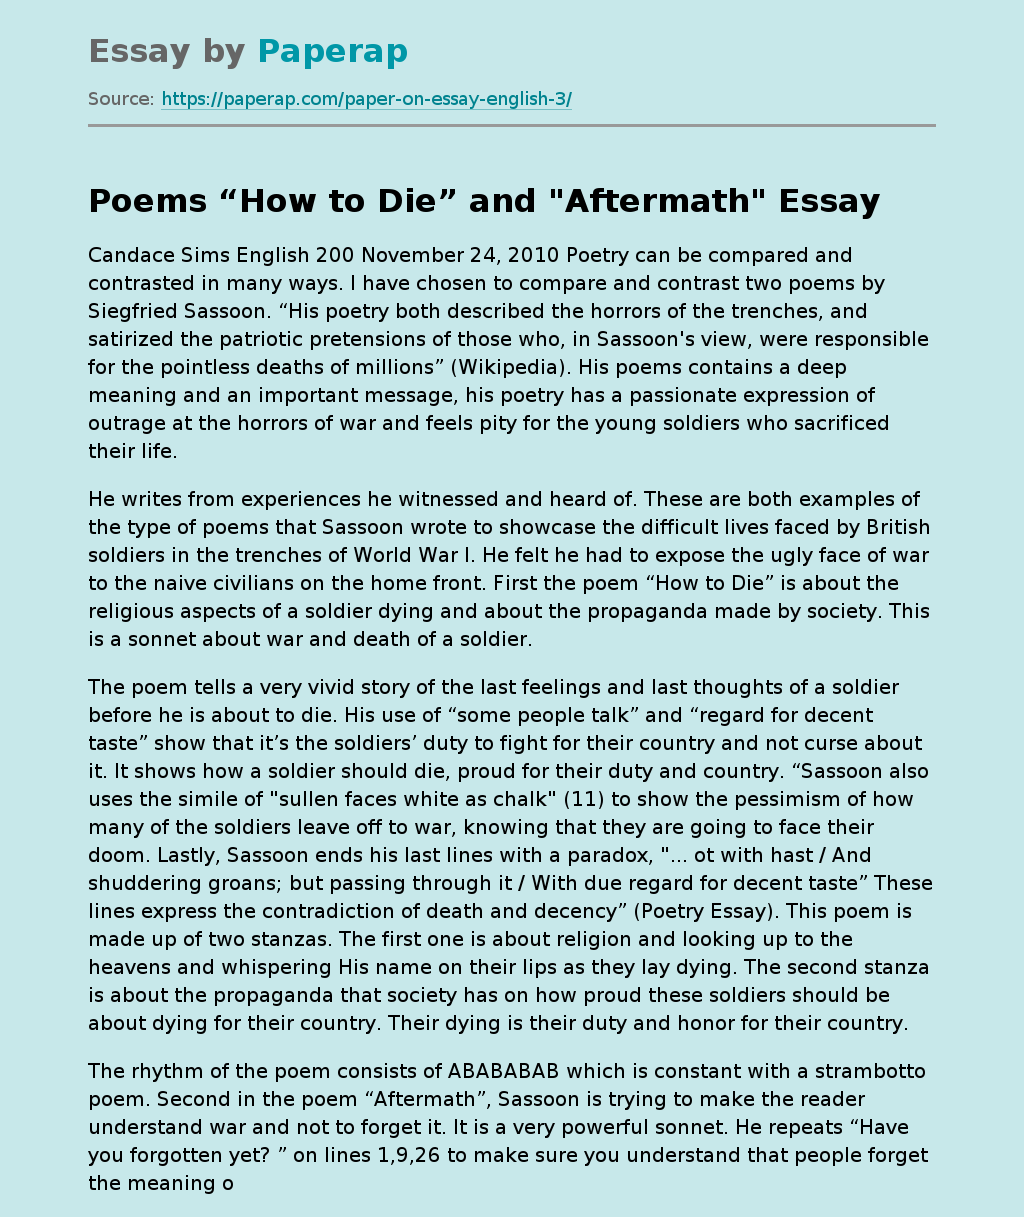 Poems “How to Die” and "Aftermath"